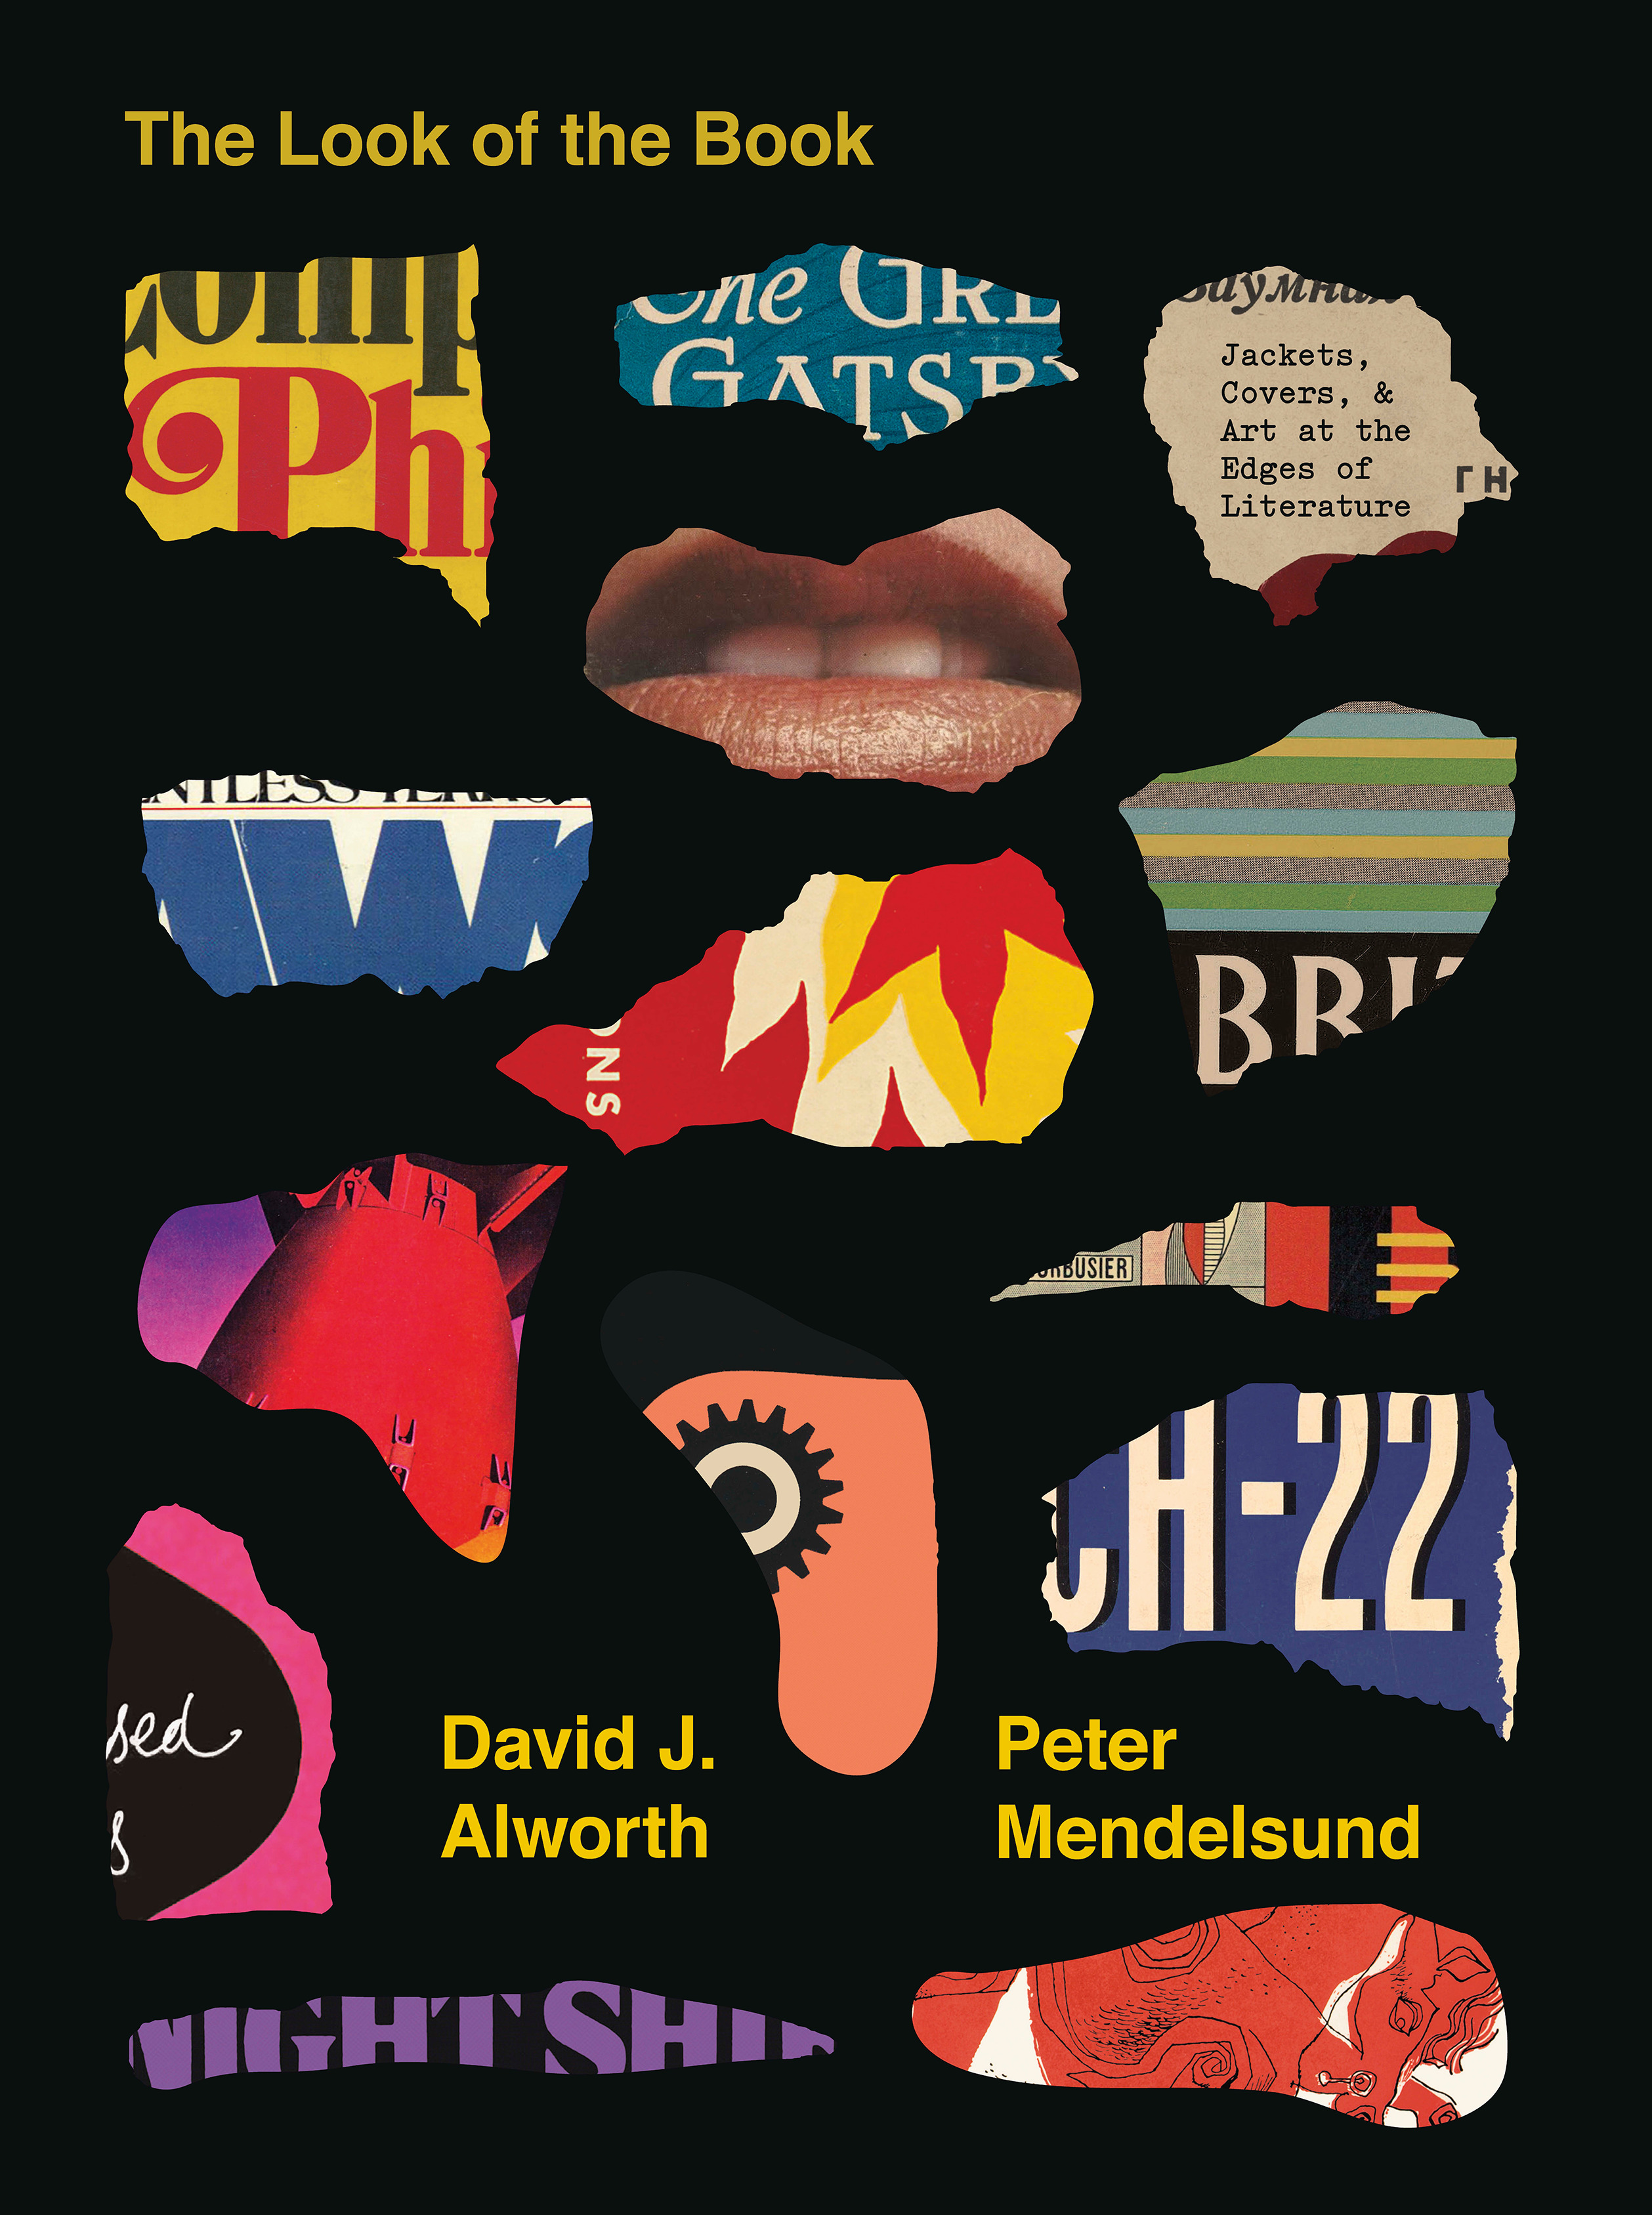 Virtual Book Launch: Look of the Book by Peter Mendelsund and David J. Alworth